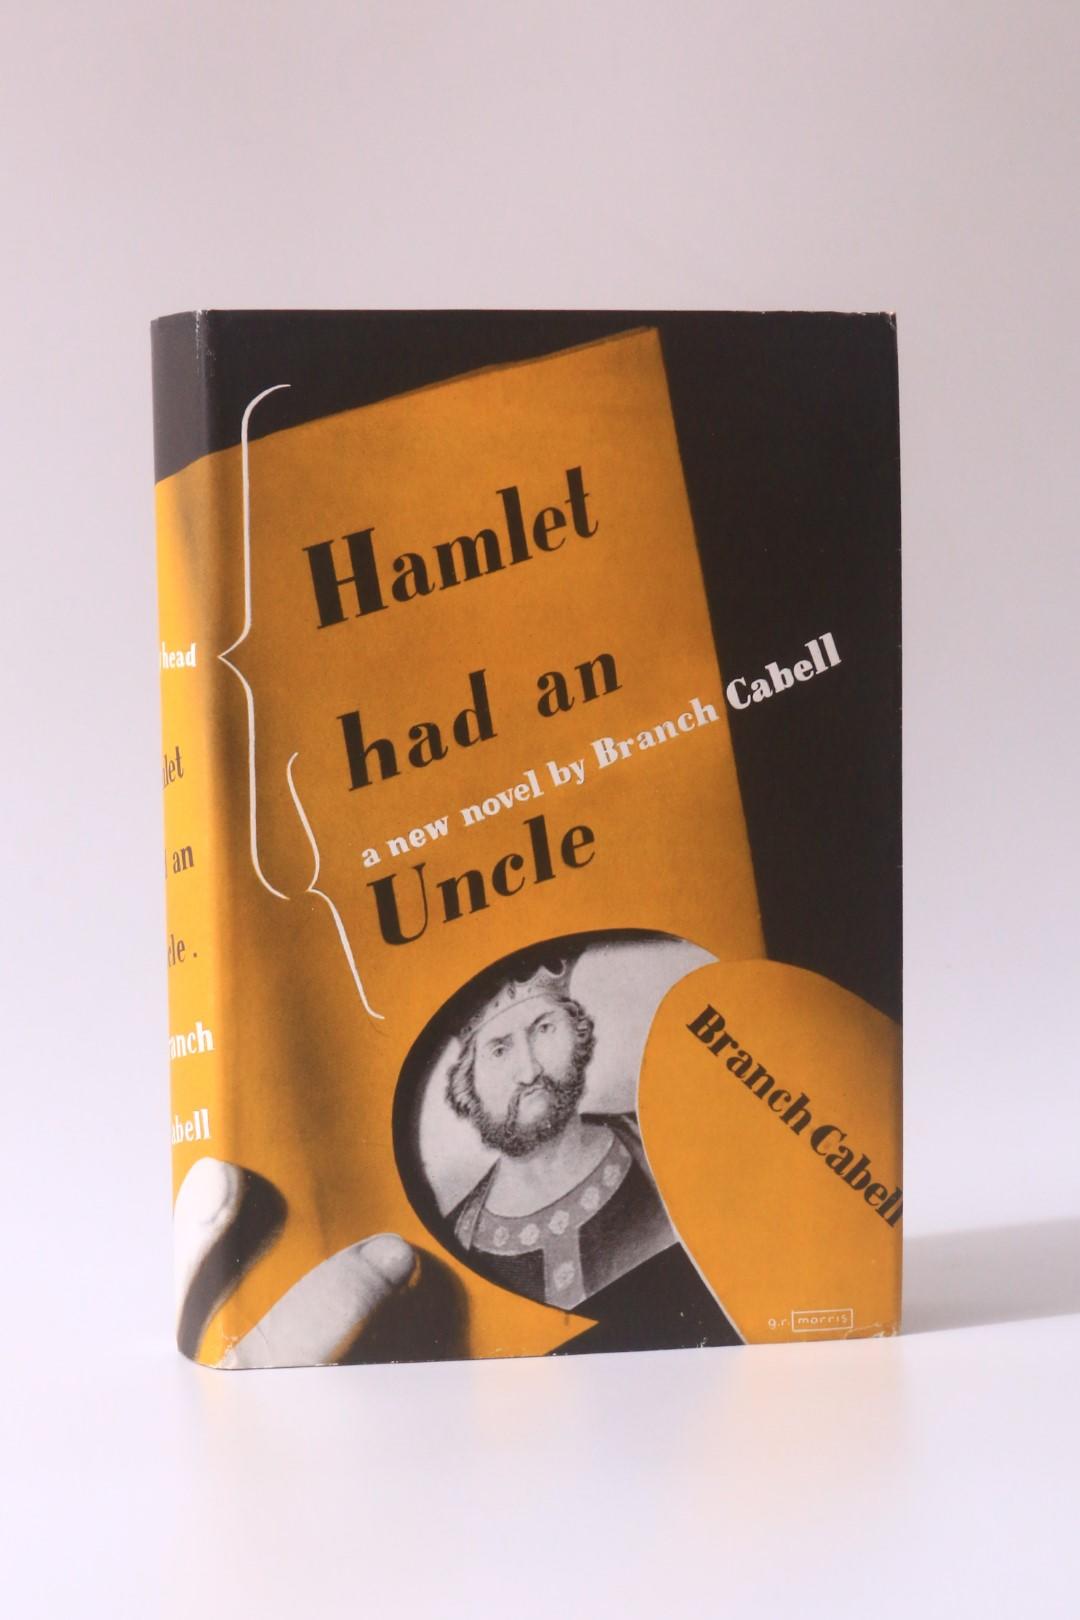 [James] Branch Cabell - Hamlet had an Uncle: A Comedy of Honour - Bodley Head, 1940, First Edition.